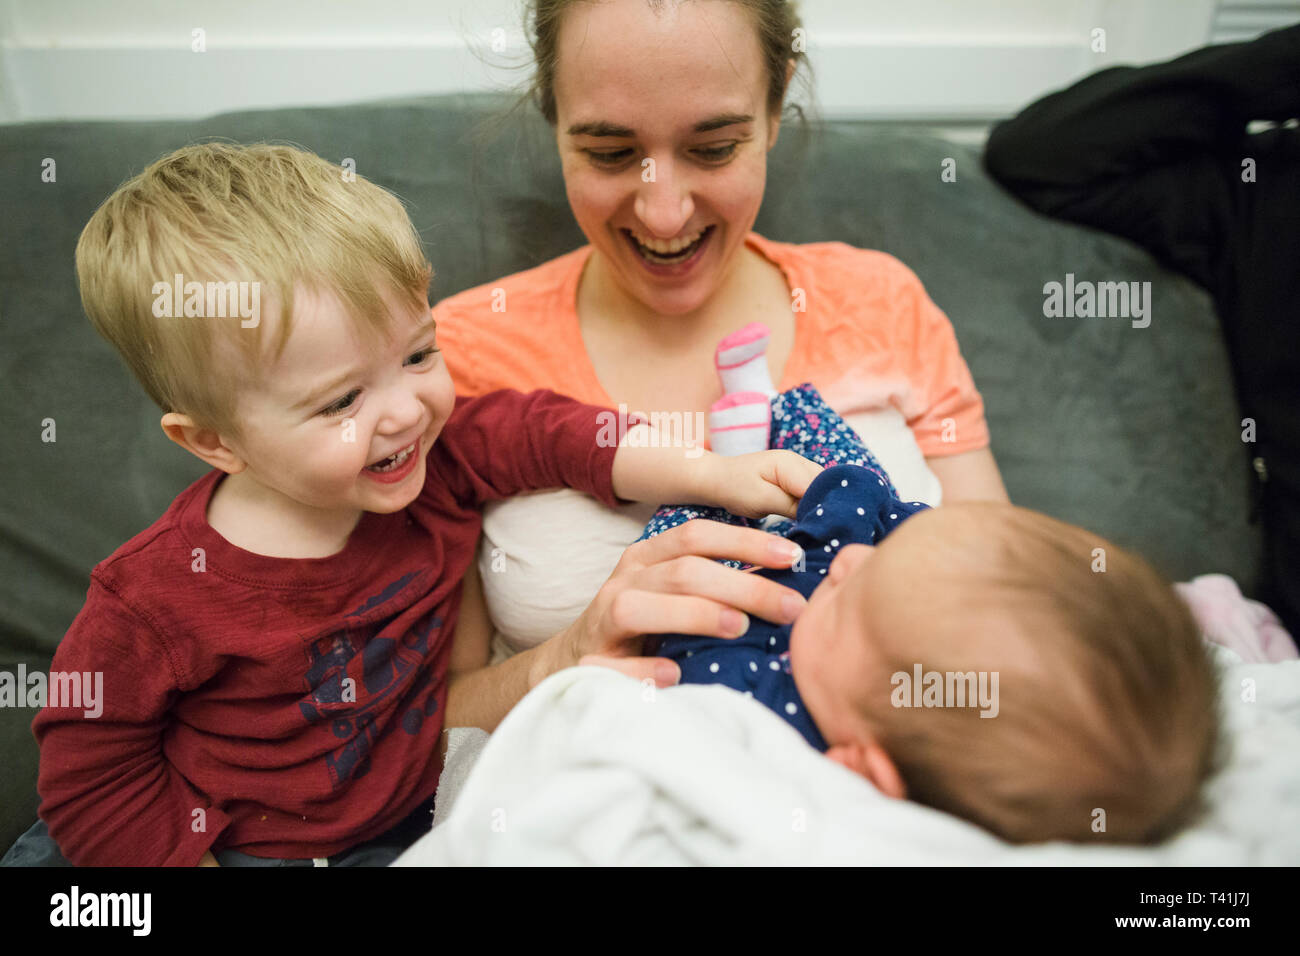 Adorable baby boy smiles at newborn baby girl being held by mother Stock Photo